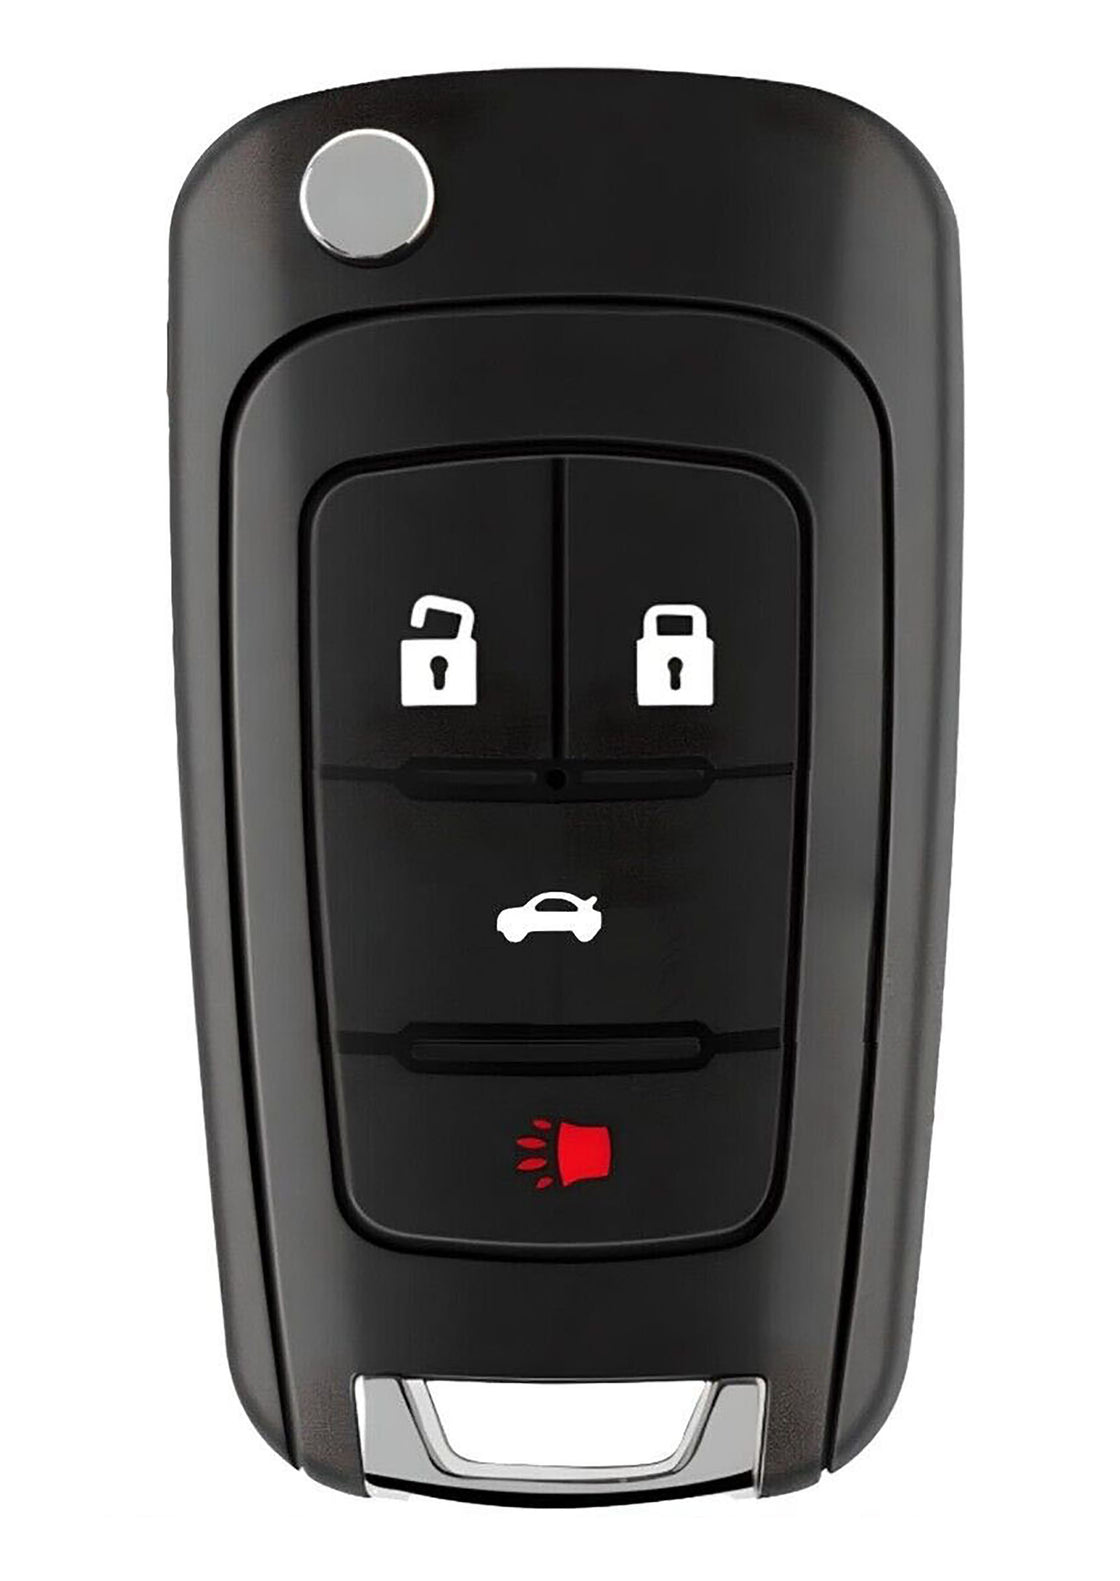 1x New Quality Replacement PEPS Proximity Key Fob Remote Compatible with & Fit For Buick & Chevrolet - MPN KR55WK50073-06